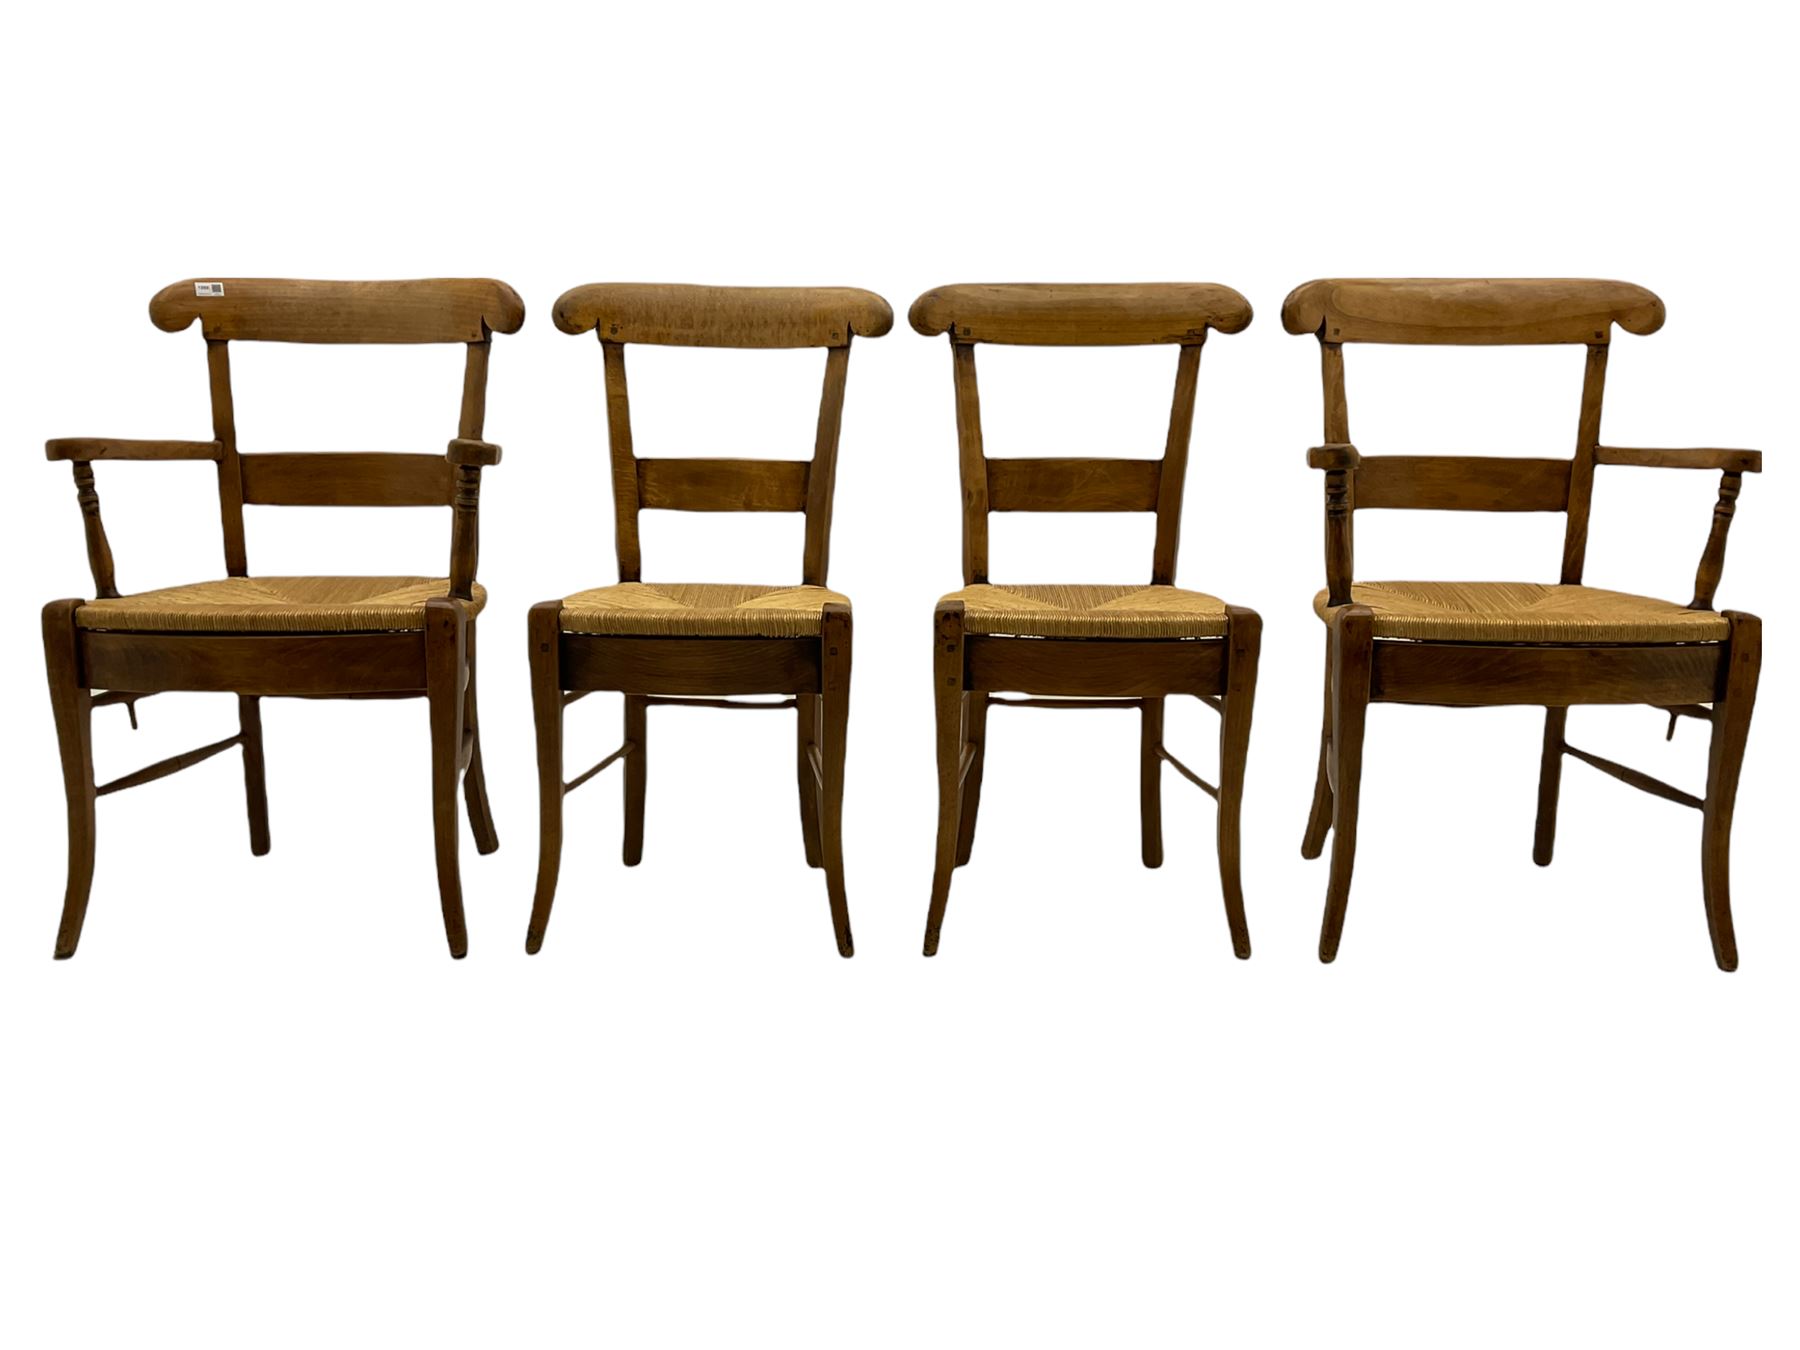 Set of four French walnut dining chairs